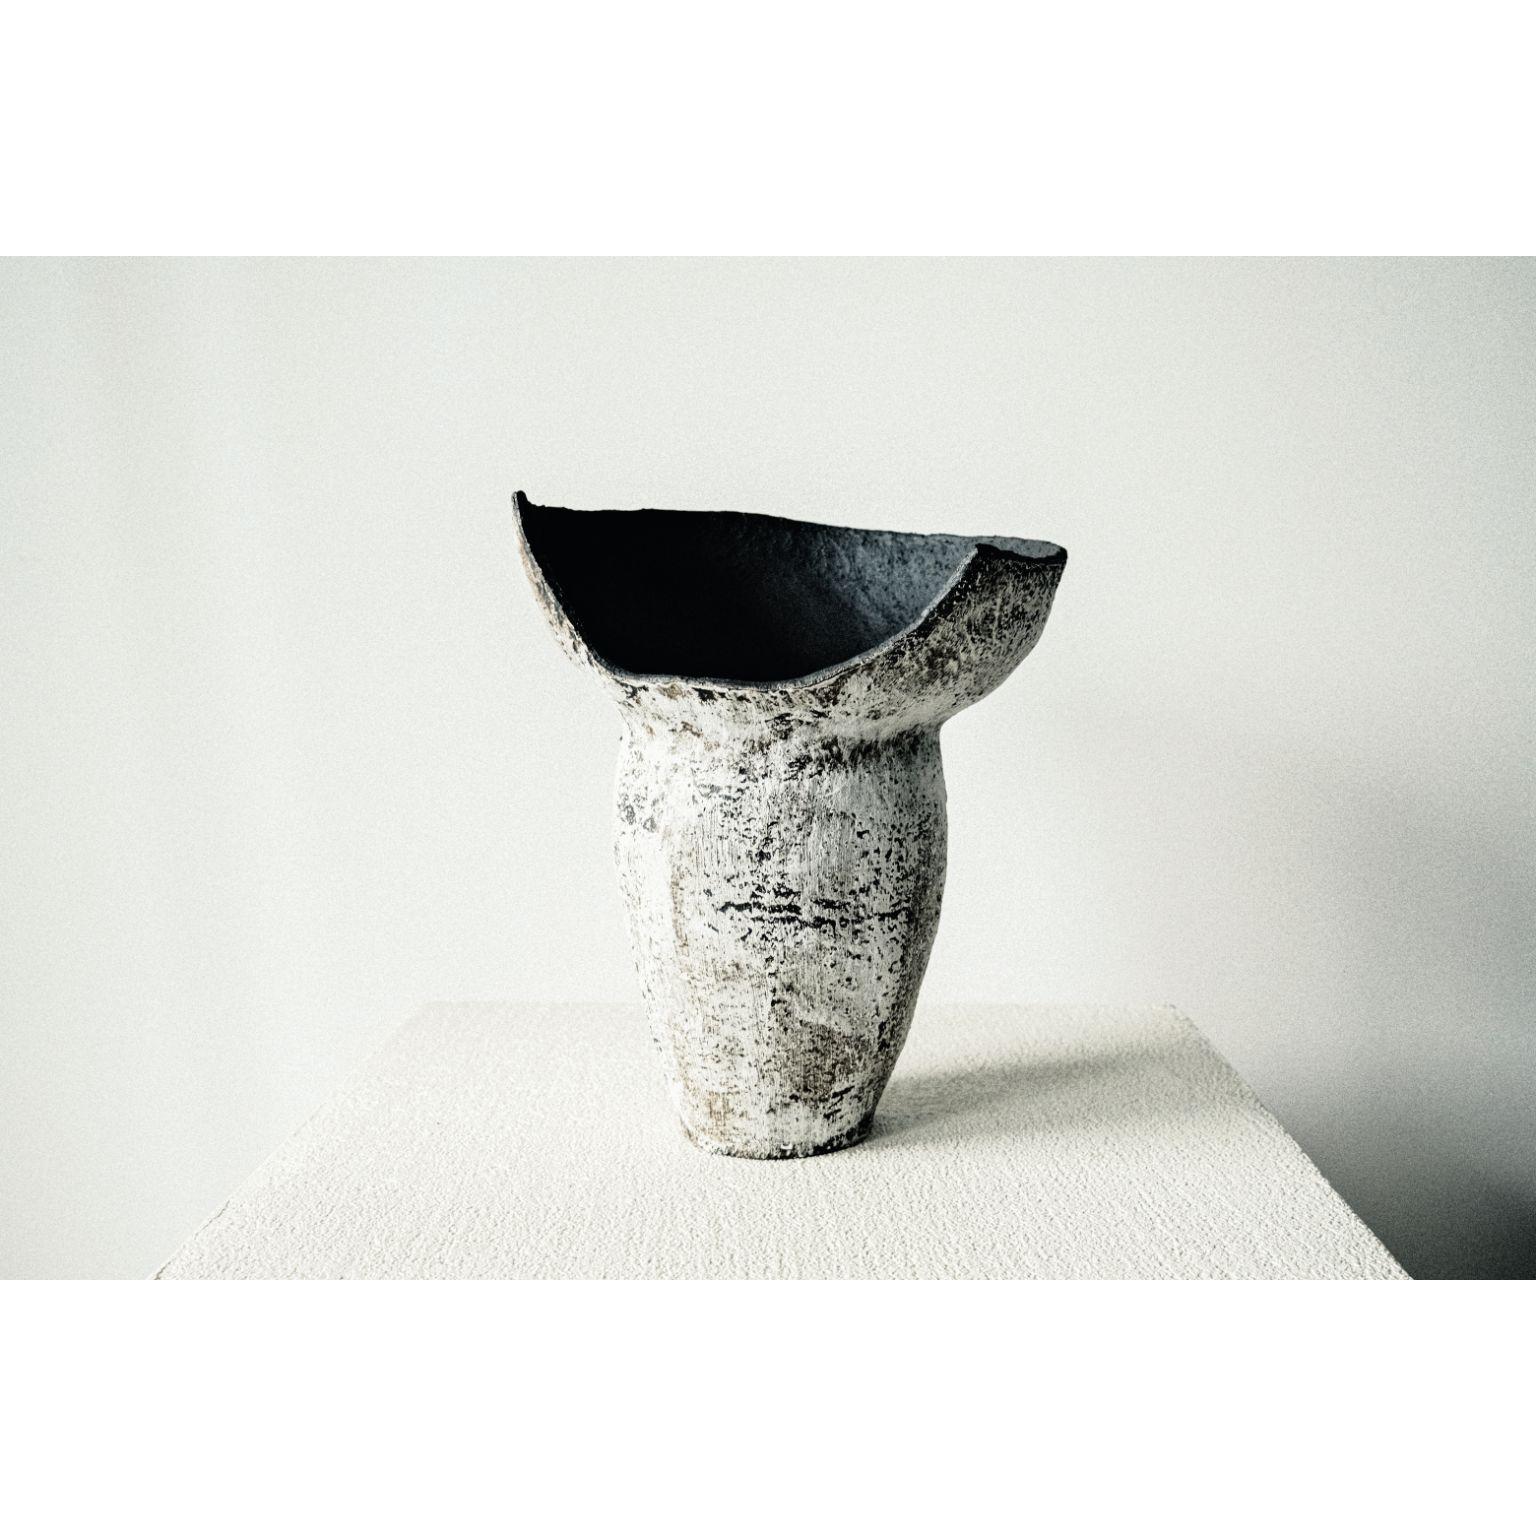 November's Vase .02 by Cécile Ducommun
Dimensions: D22 x H33 cm
Materials: Stoneware.

Hand modeled stoneware, fired at 1250 degrees. May contain water.

